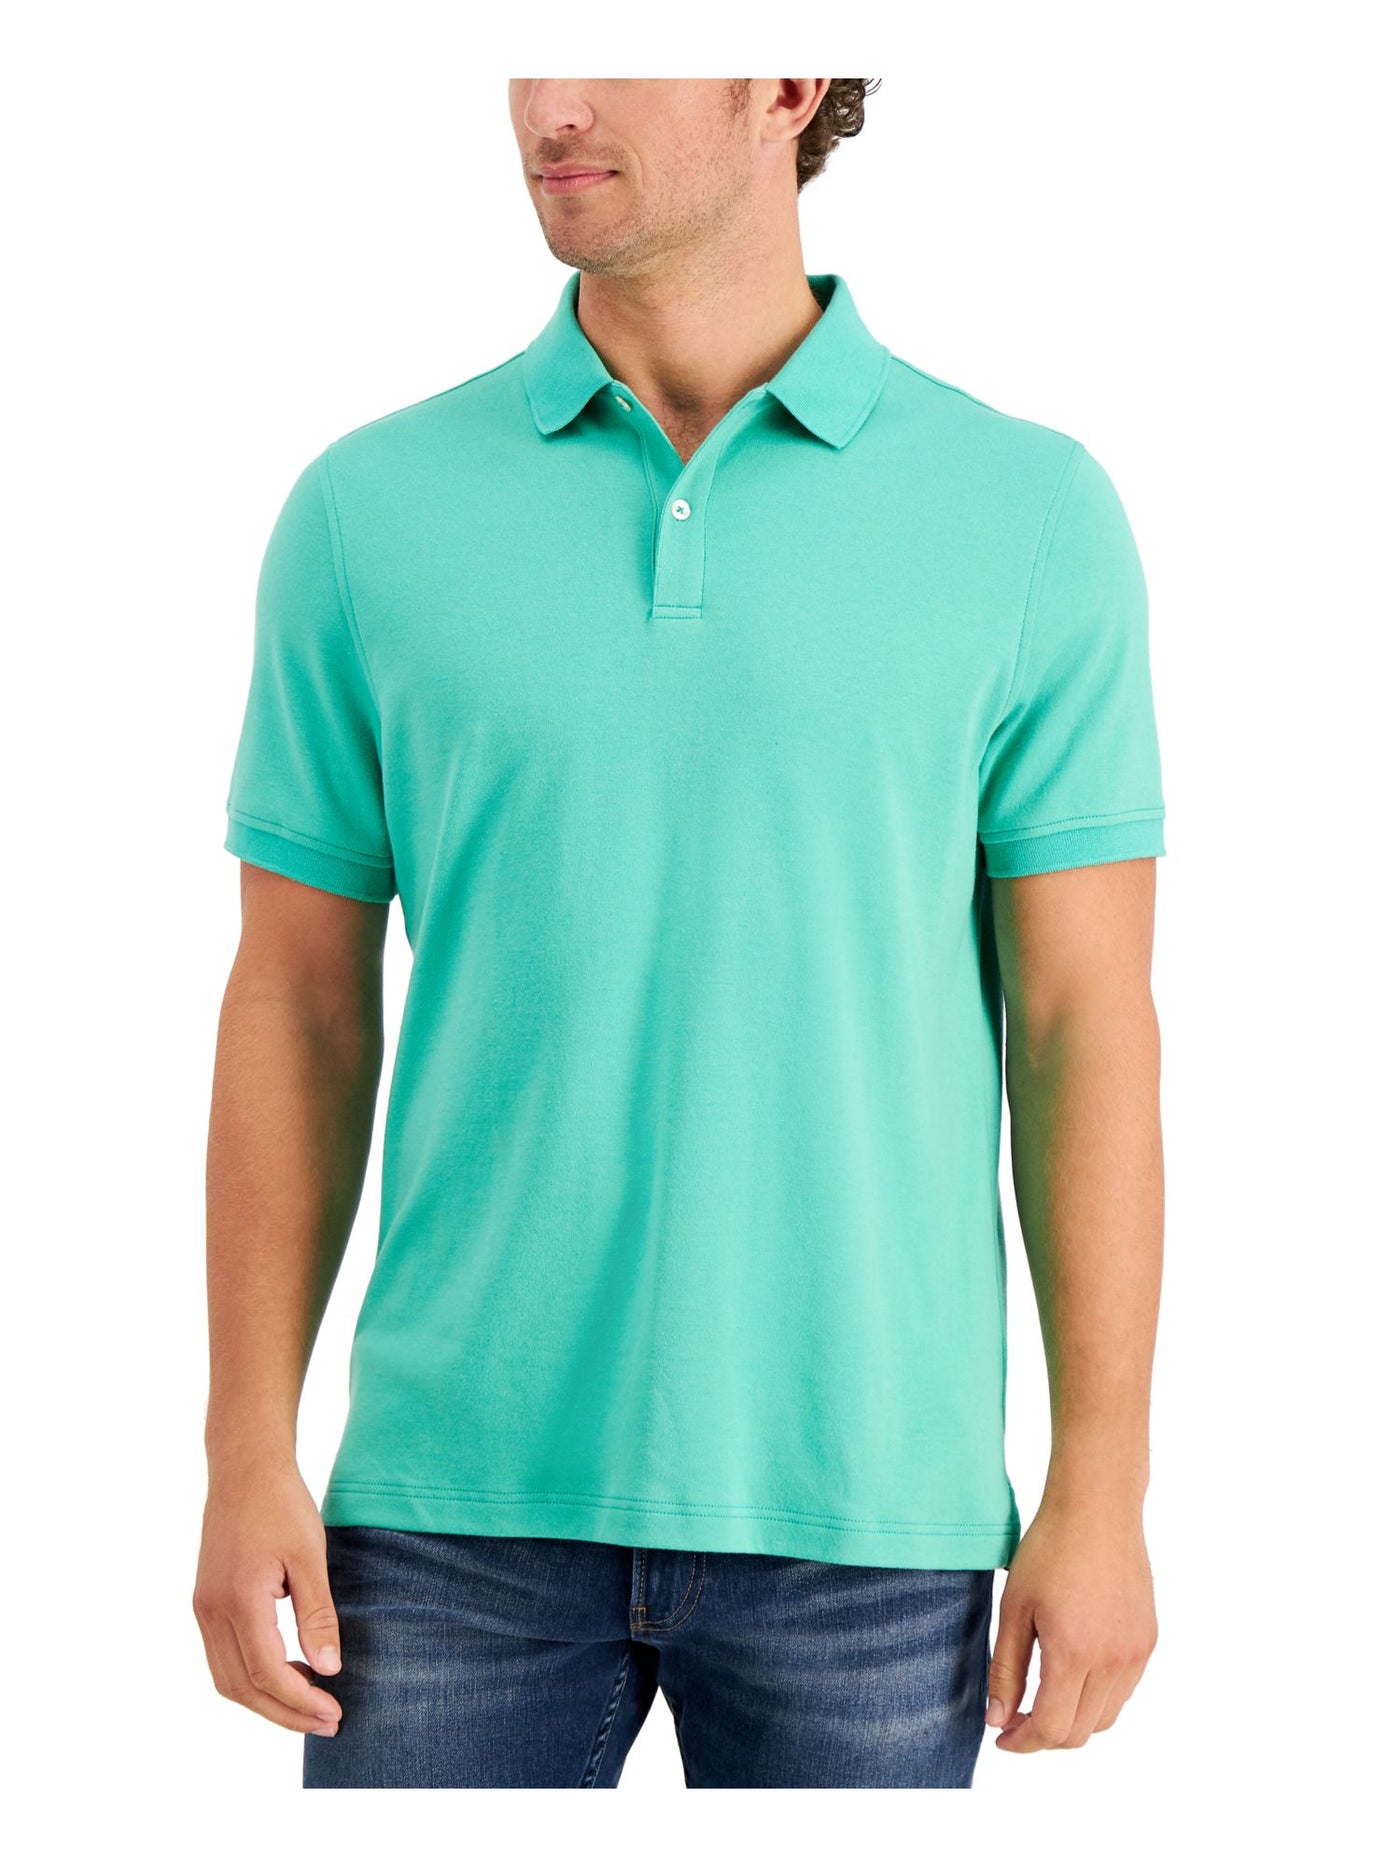 CLUBROOM Mens Soft Touch Interlock Green Classic Fit Polo M